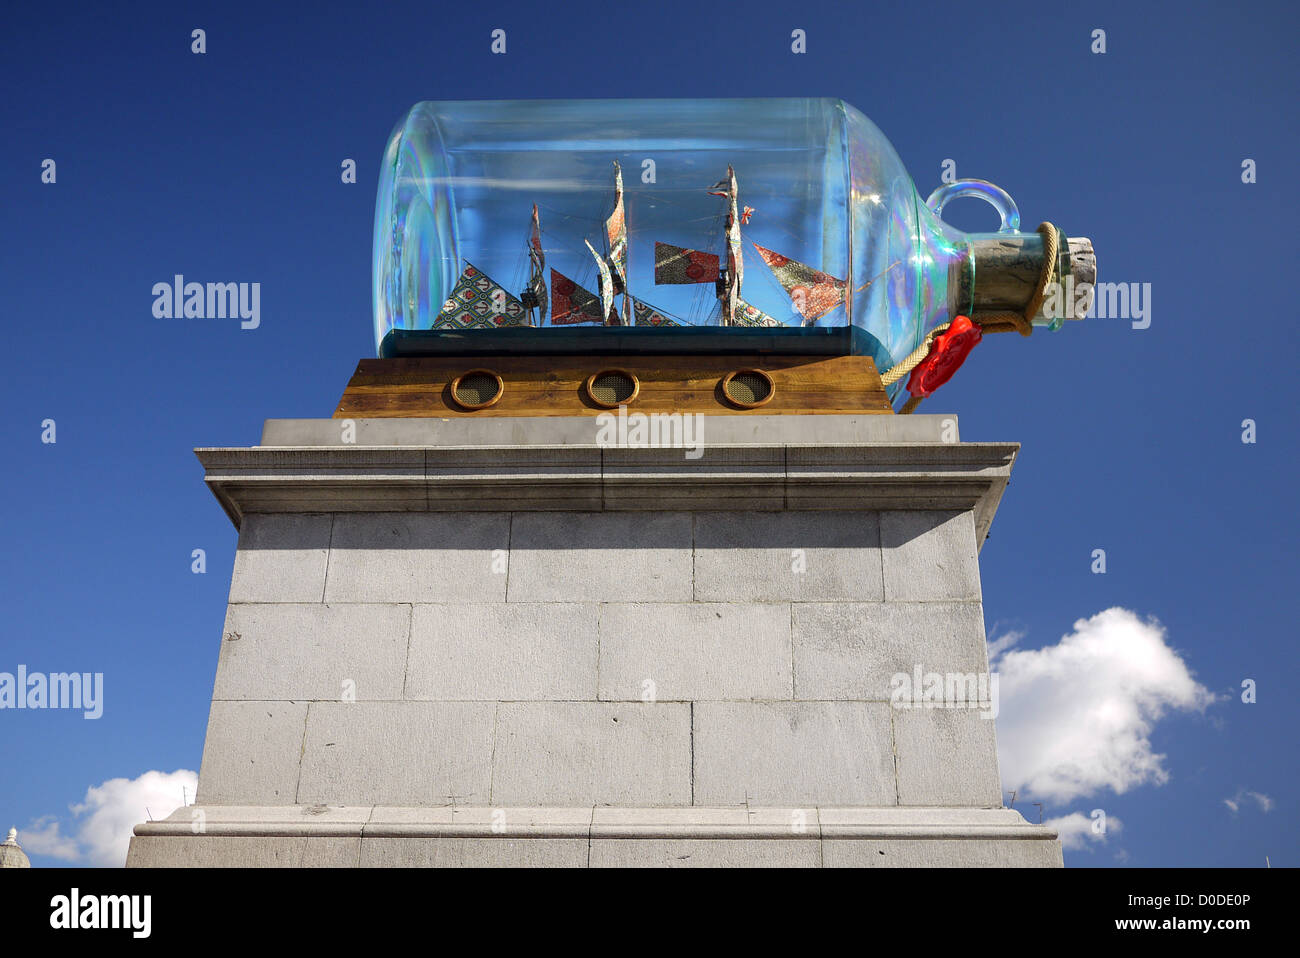 'Nelsons ship in a bottle' by Yinka Shonibare on the forth plinth Trafalgar Square London UK Stock Photo